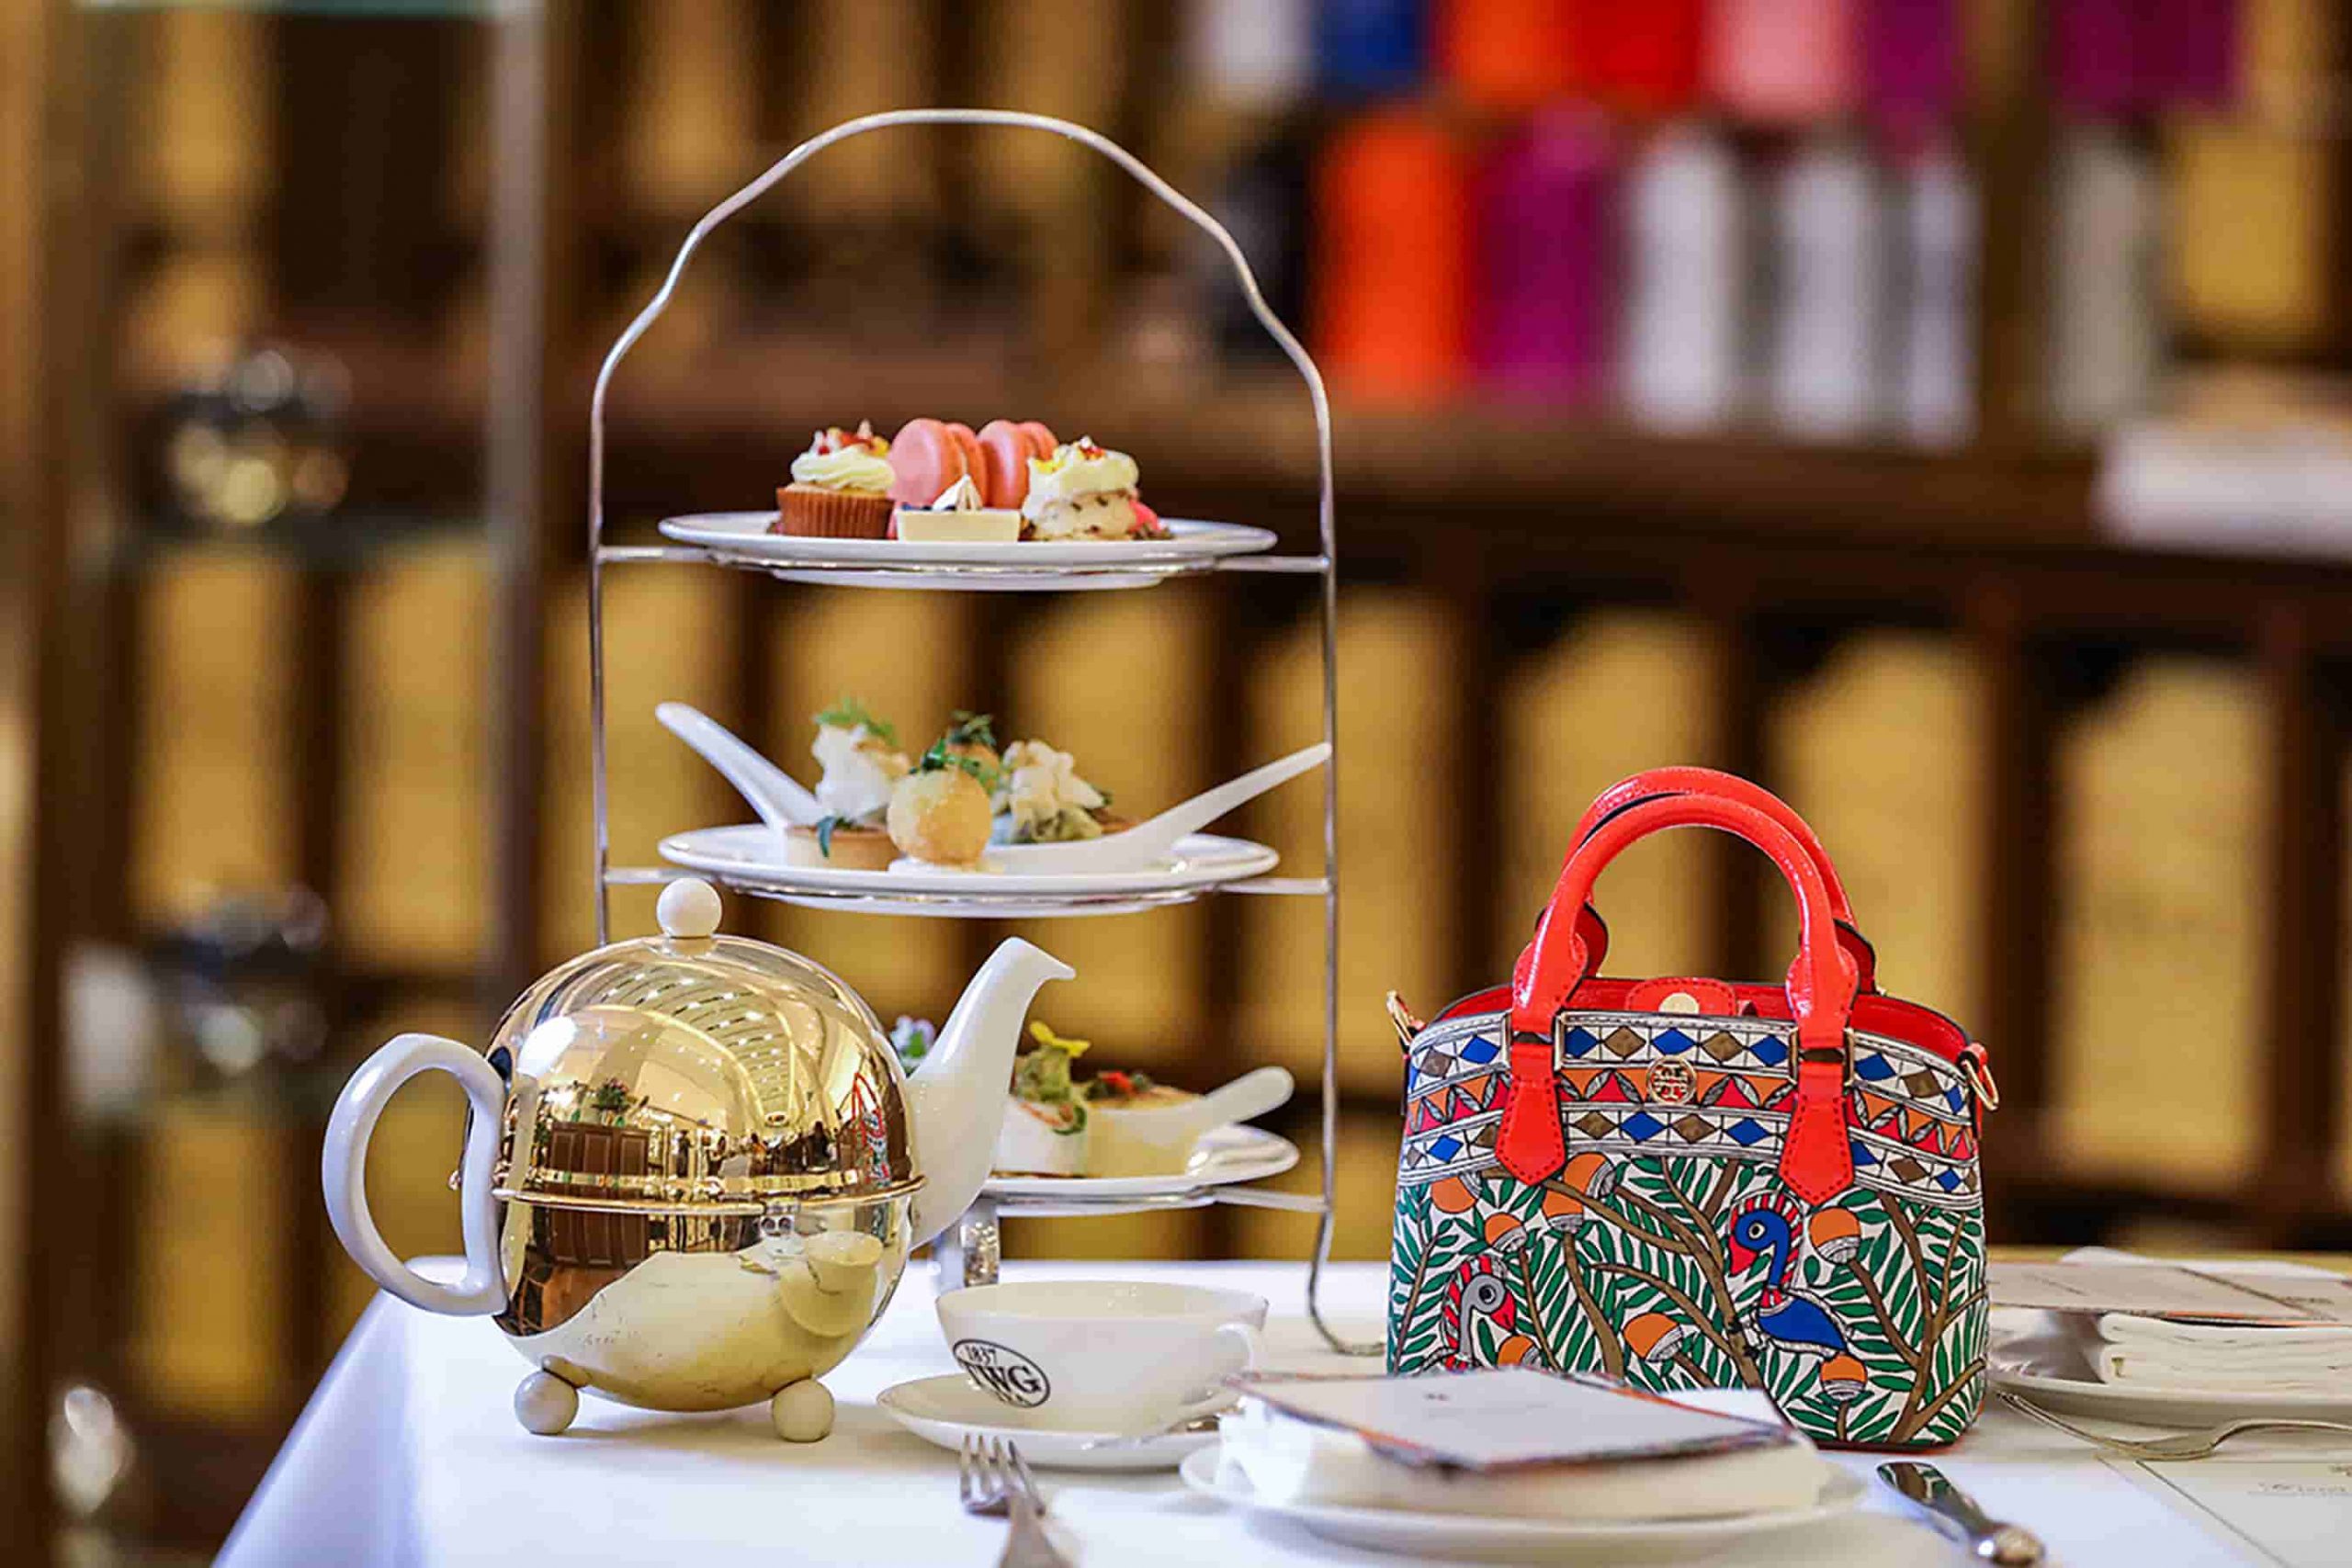 Tory Burch x TWG Tea come together to tell the stories of Destinations  Anywhere